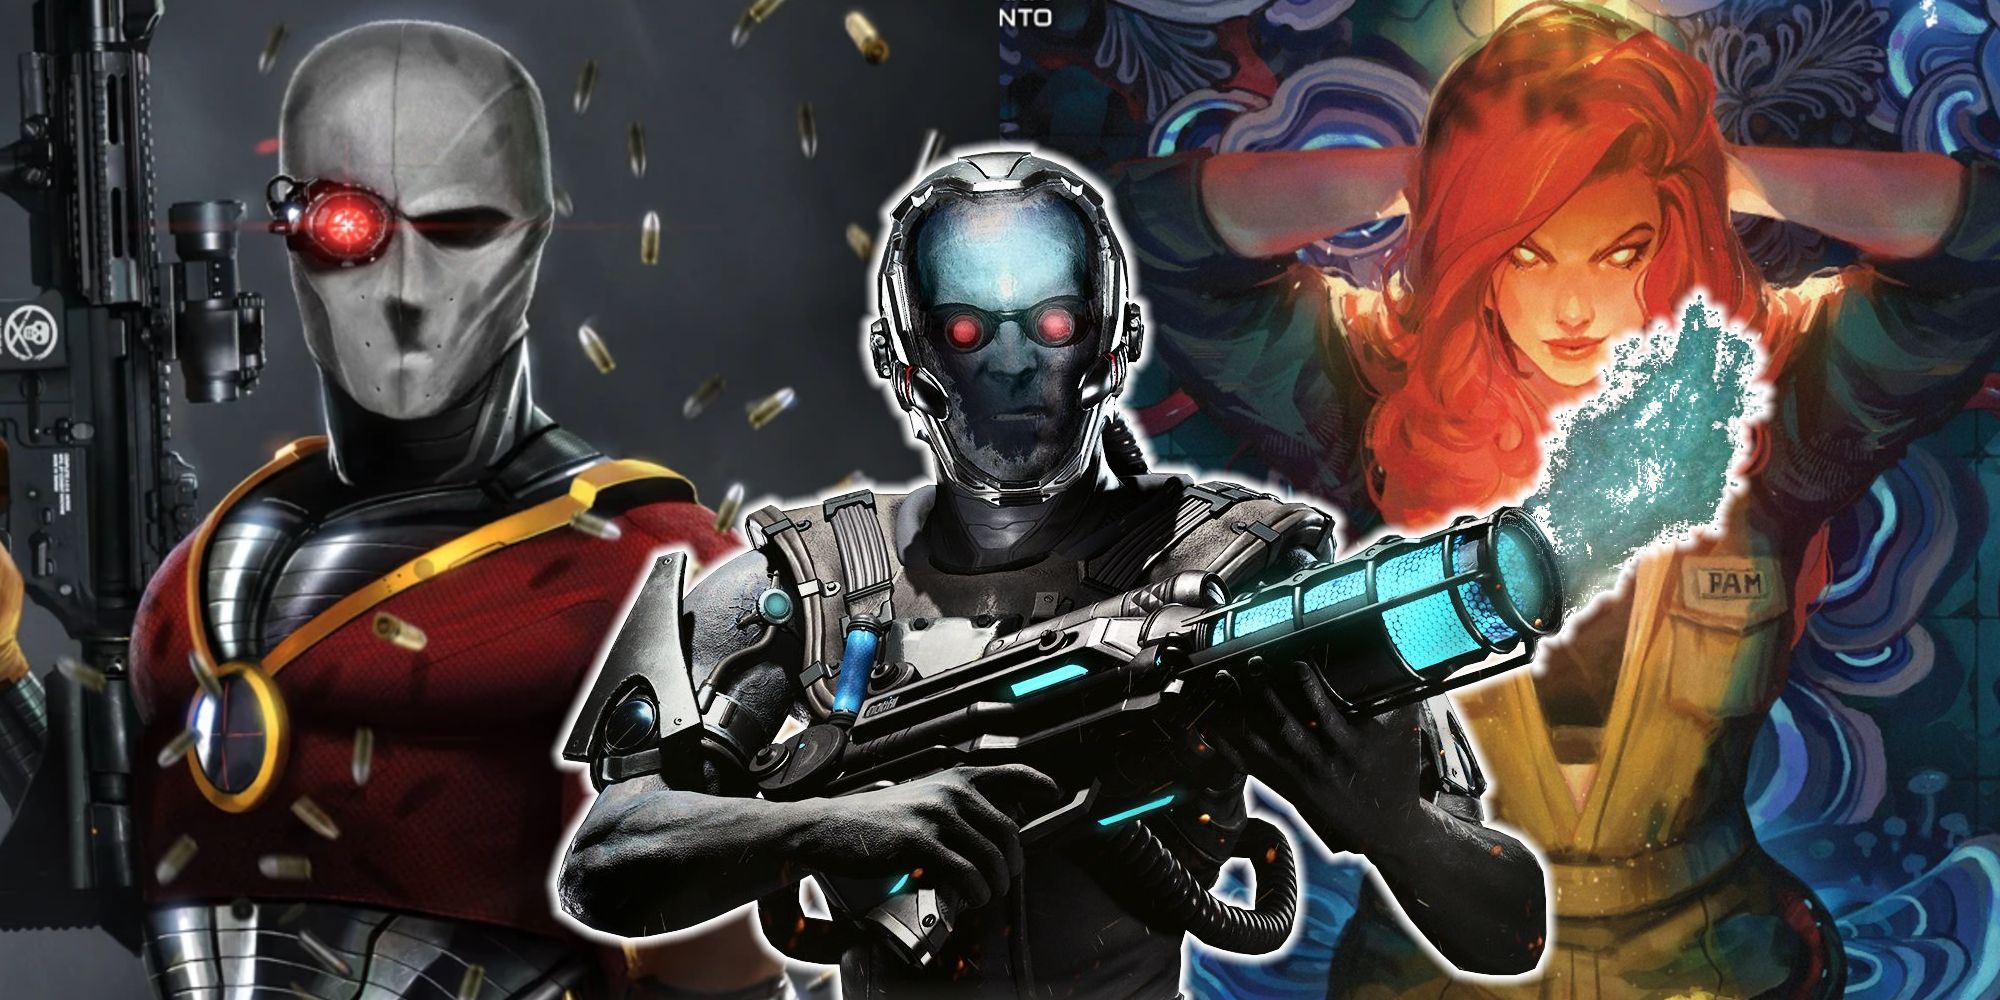 Split image of Deadshot, Mr. Freeze, and Poison Ivy from DC Comics